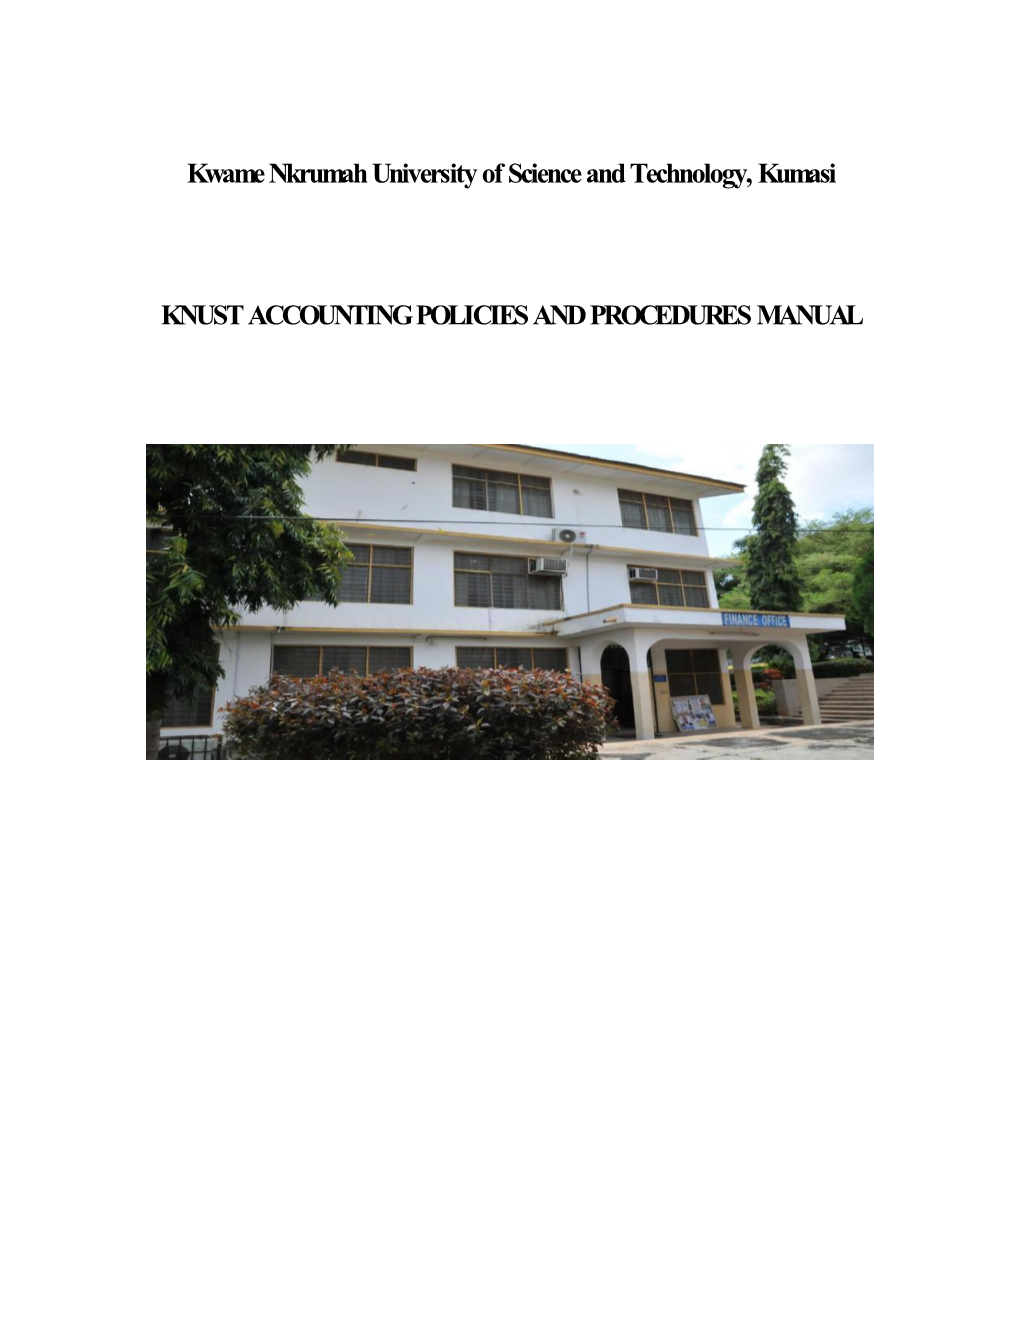 Knust Accounting Policies and Procedures Manual